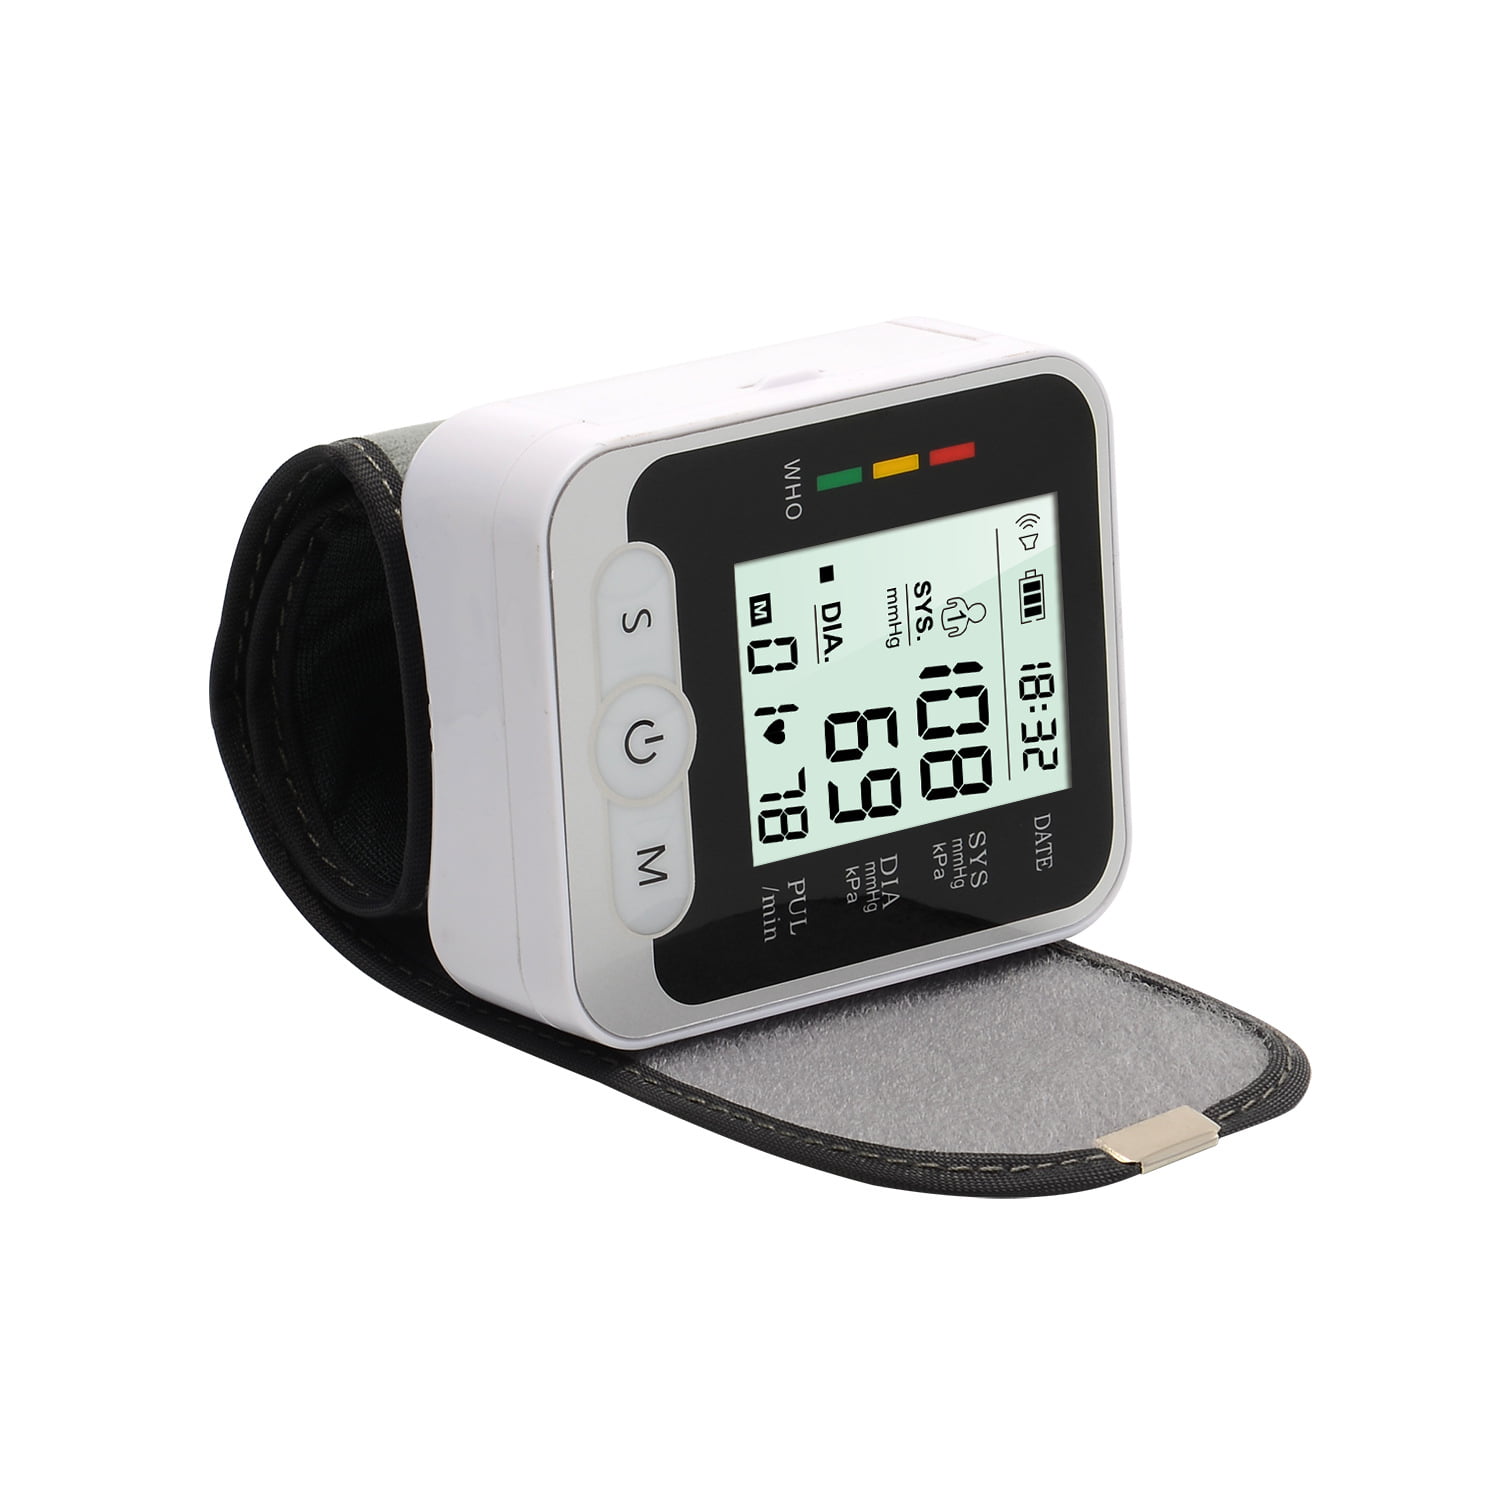 Wrist Blood Pressure Monitor, 2.5-inch VA Touch Display and Wrist